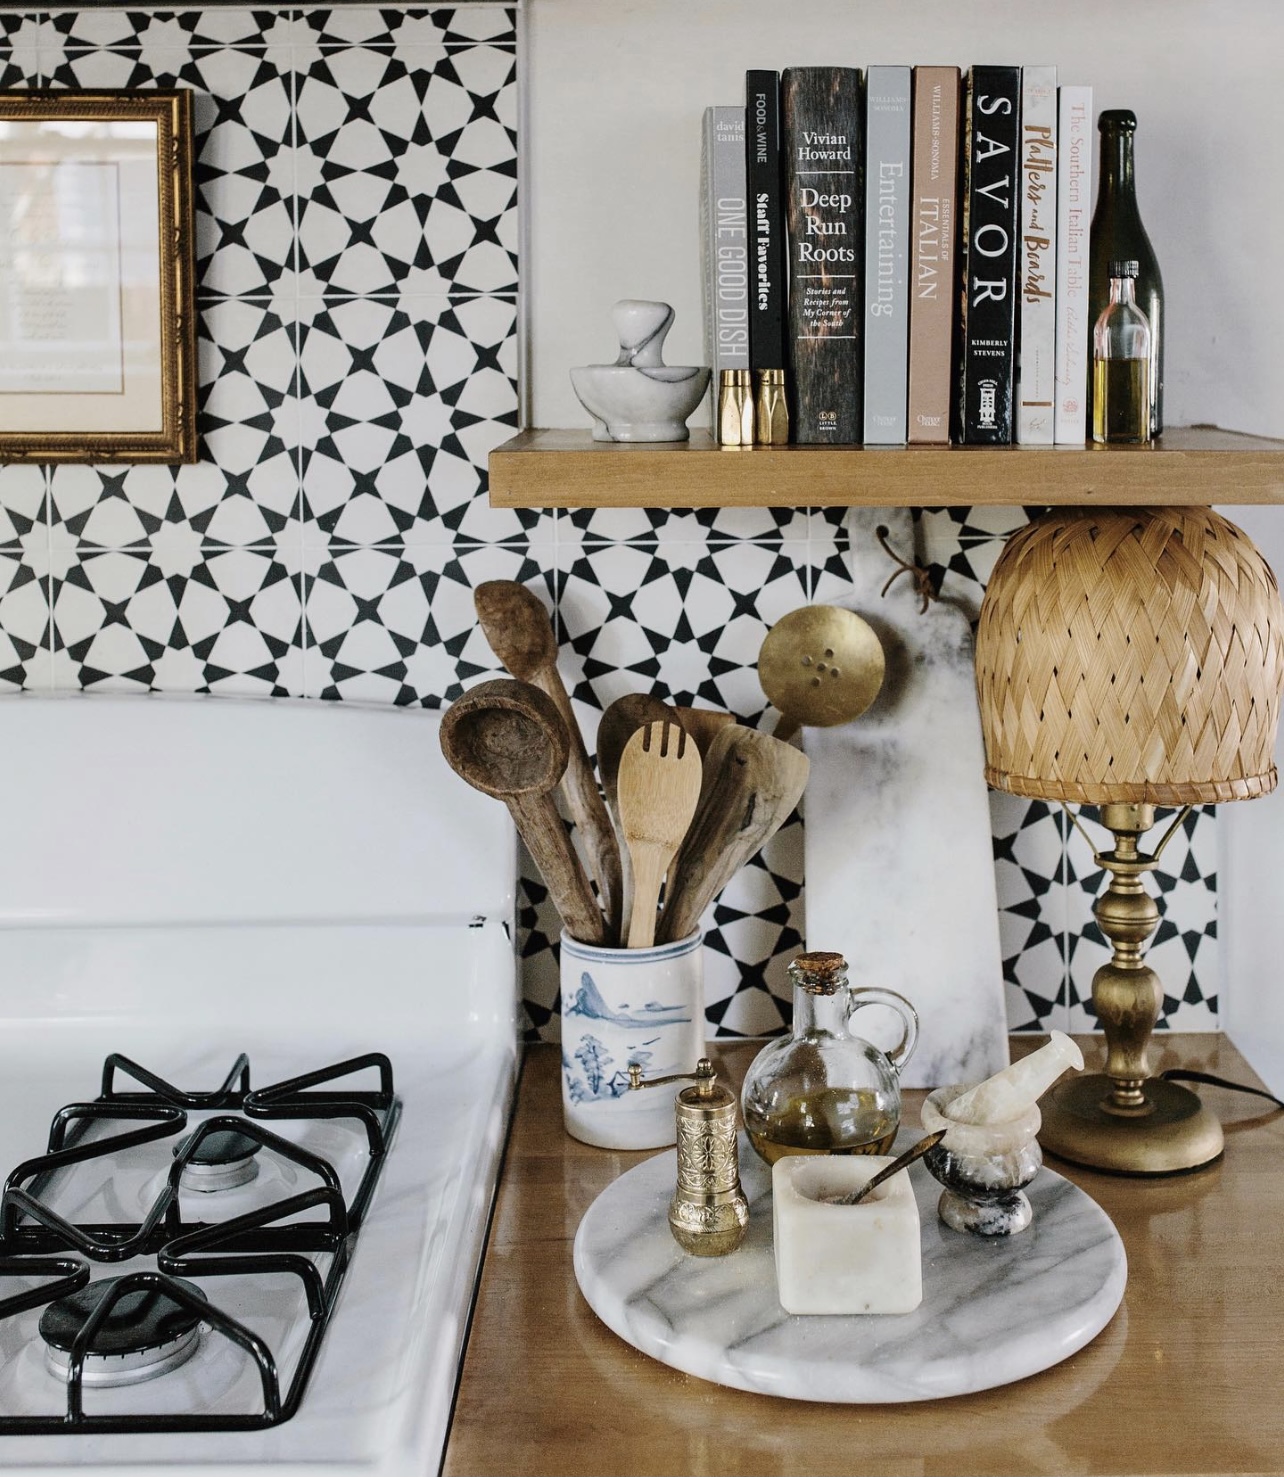 Décor Inspiration | At Home With: Photographer Carley Page Summers